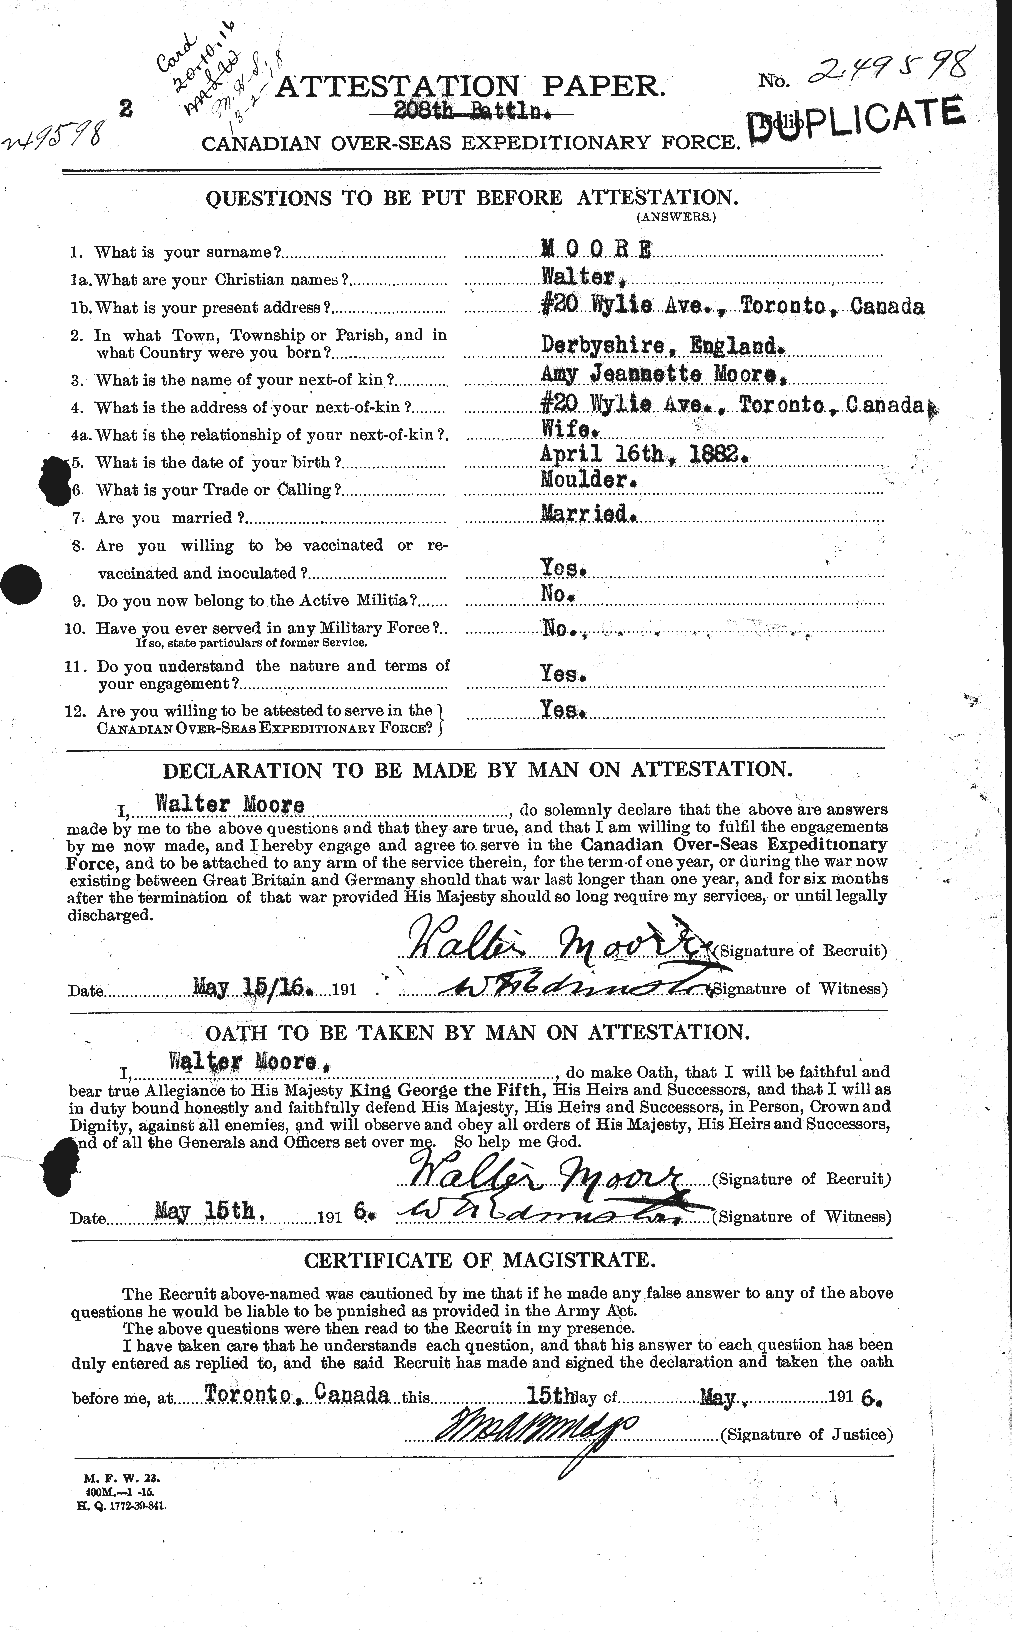 Personnel Records of the First World War - CEF 505696a